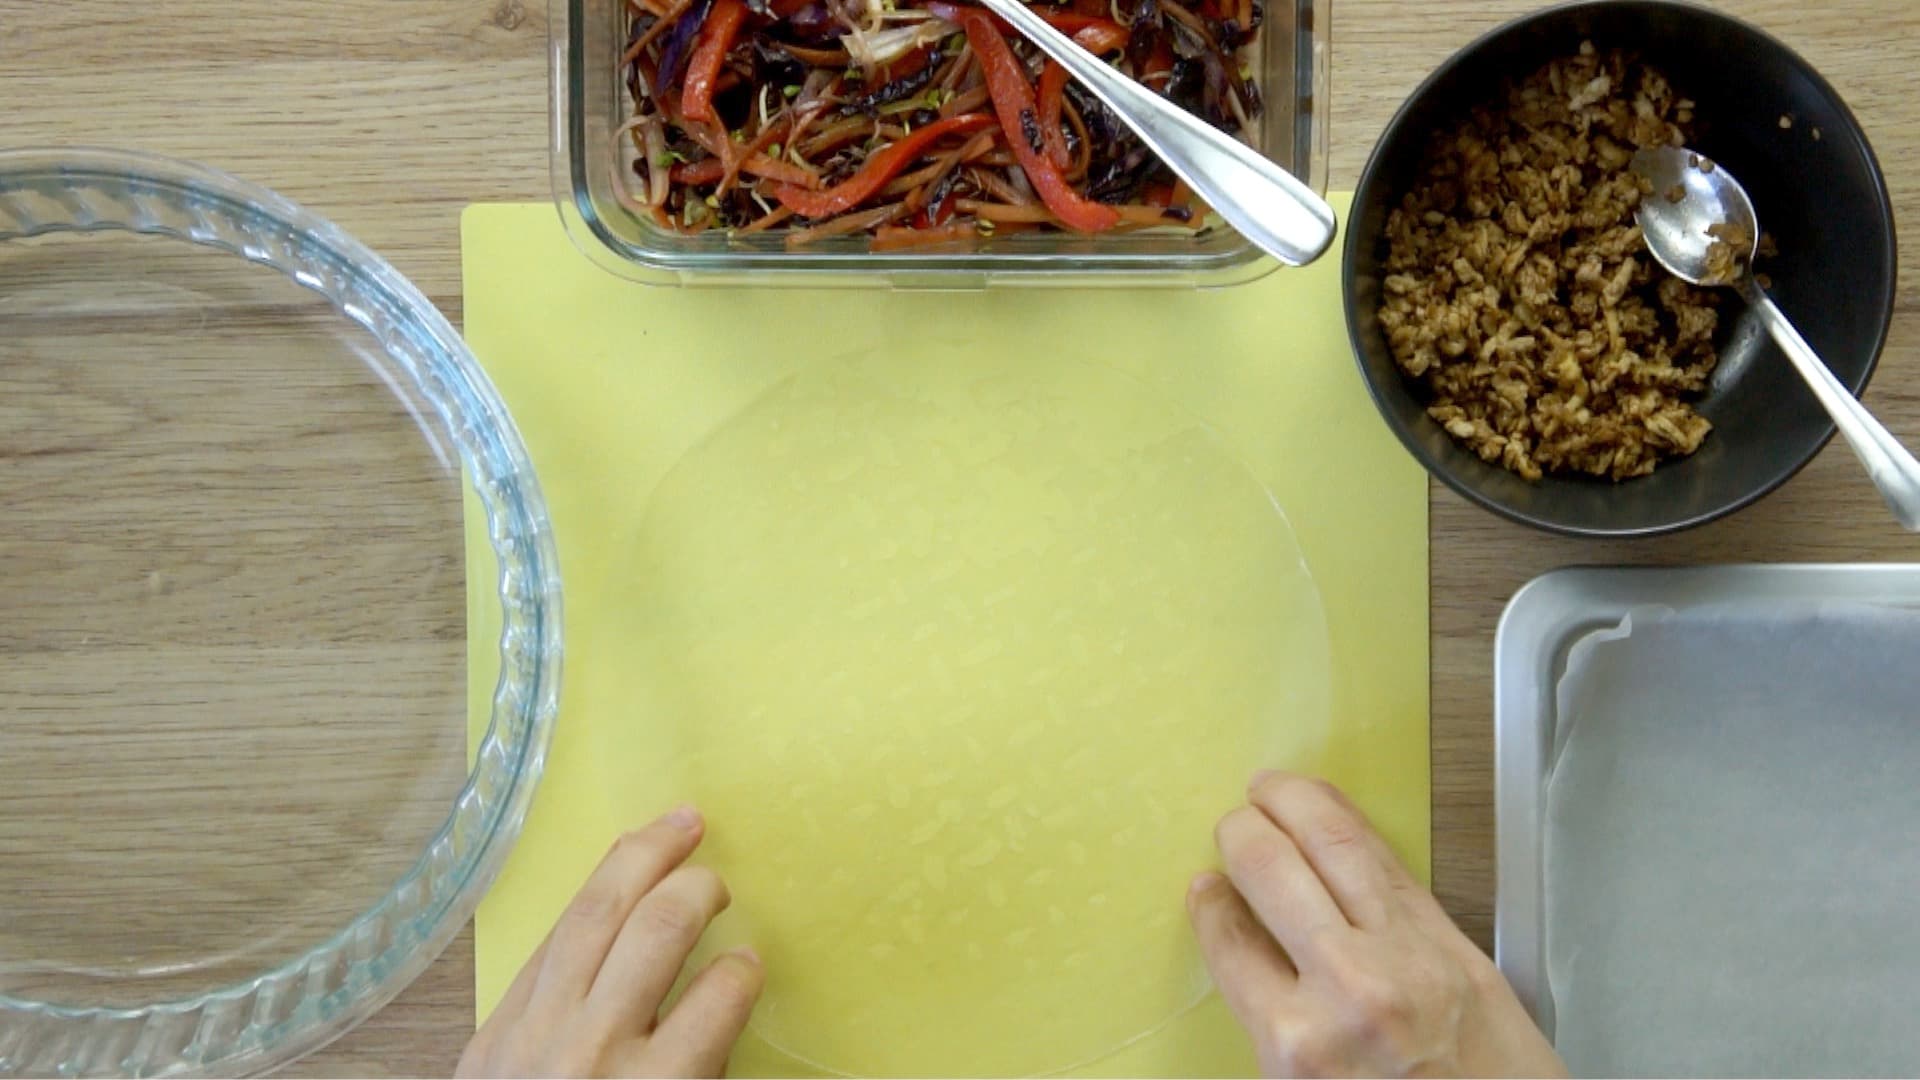 A hand places the softened rice paper on the yellow board. The fillings are in small bowls next to it.